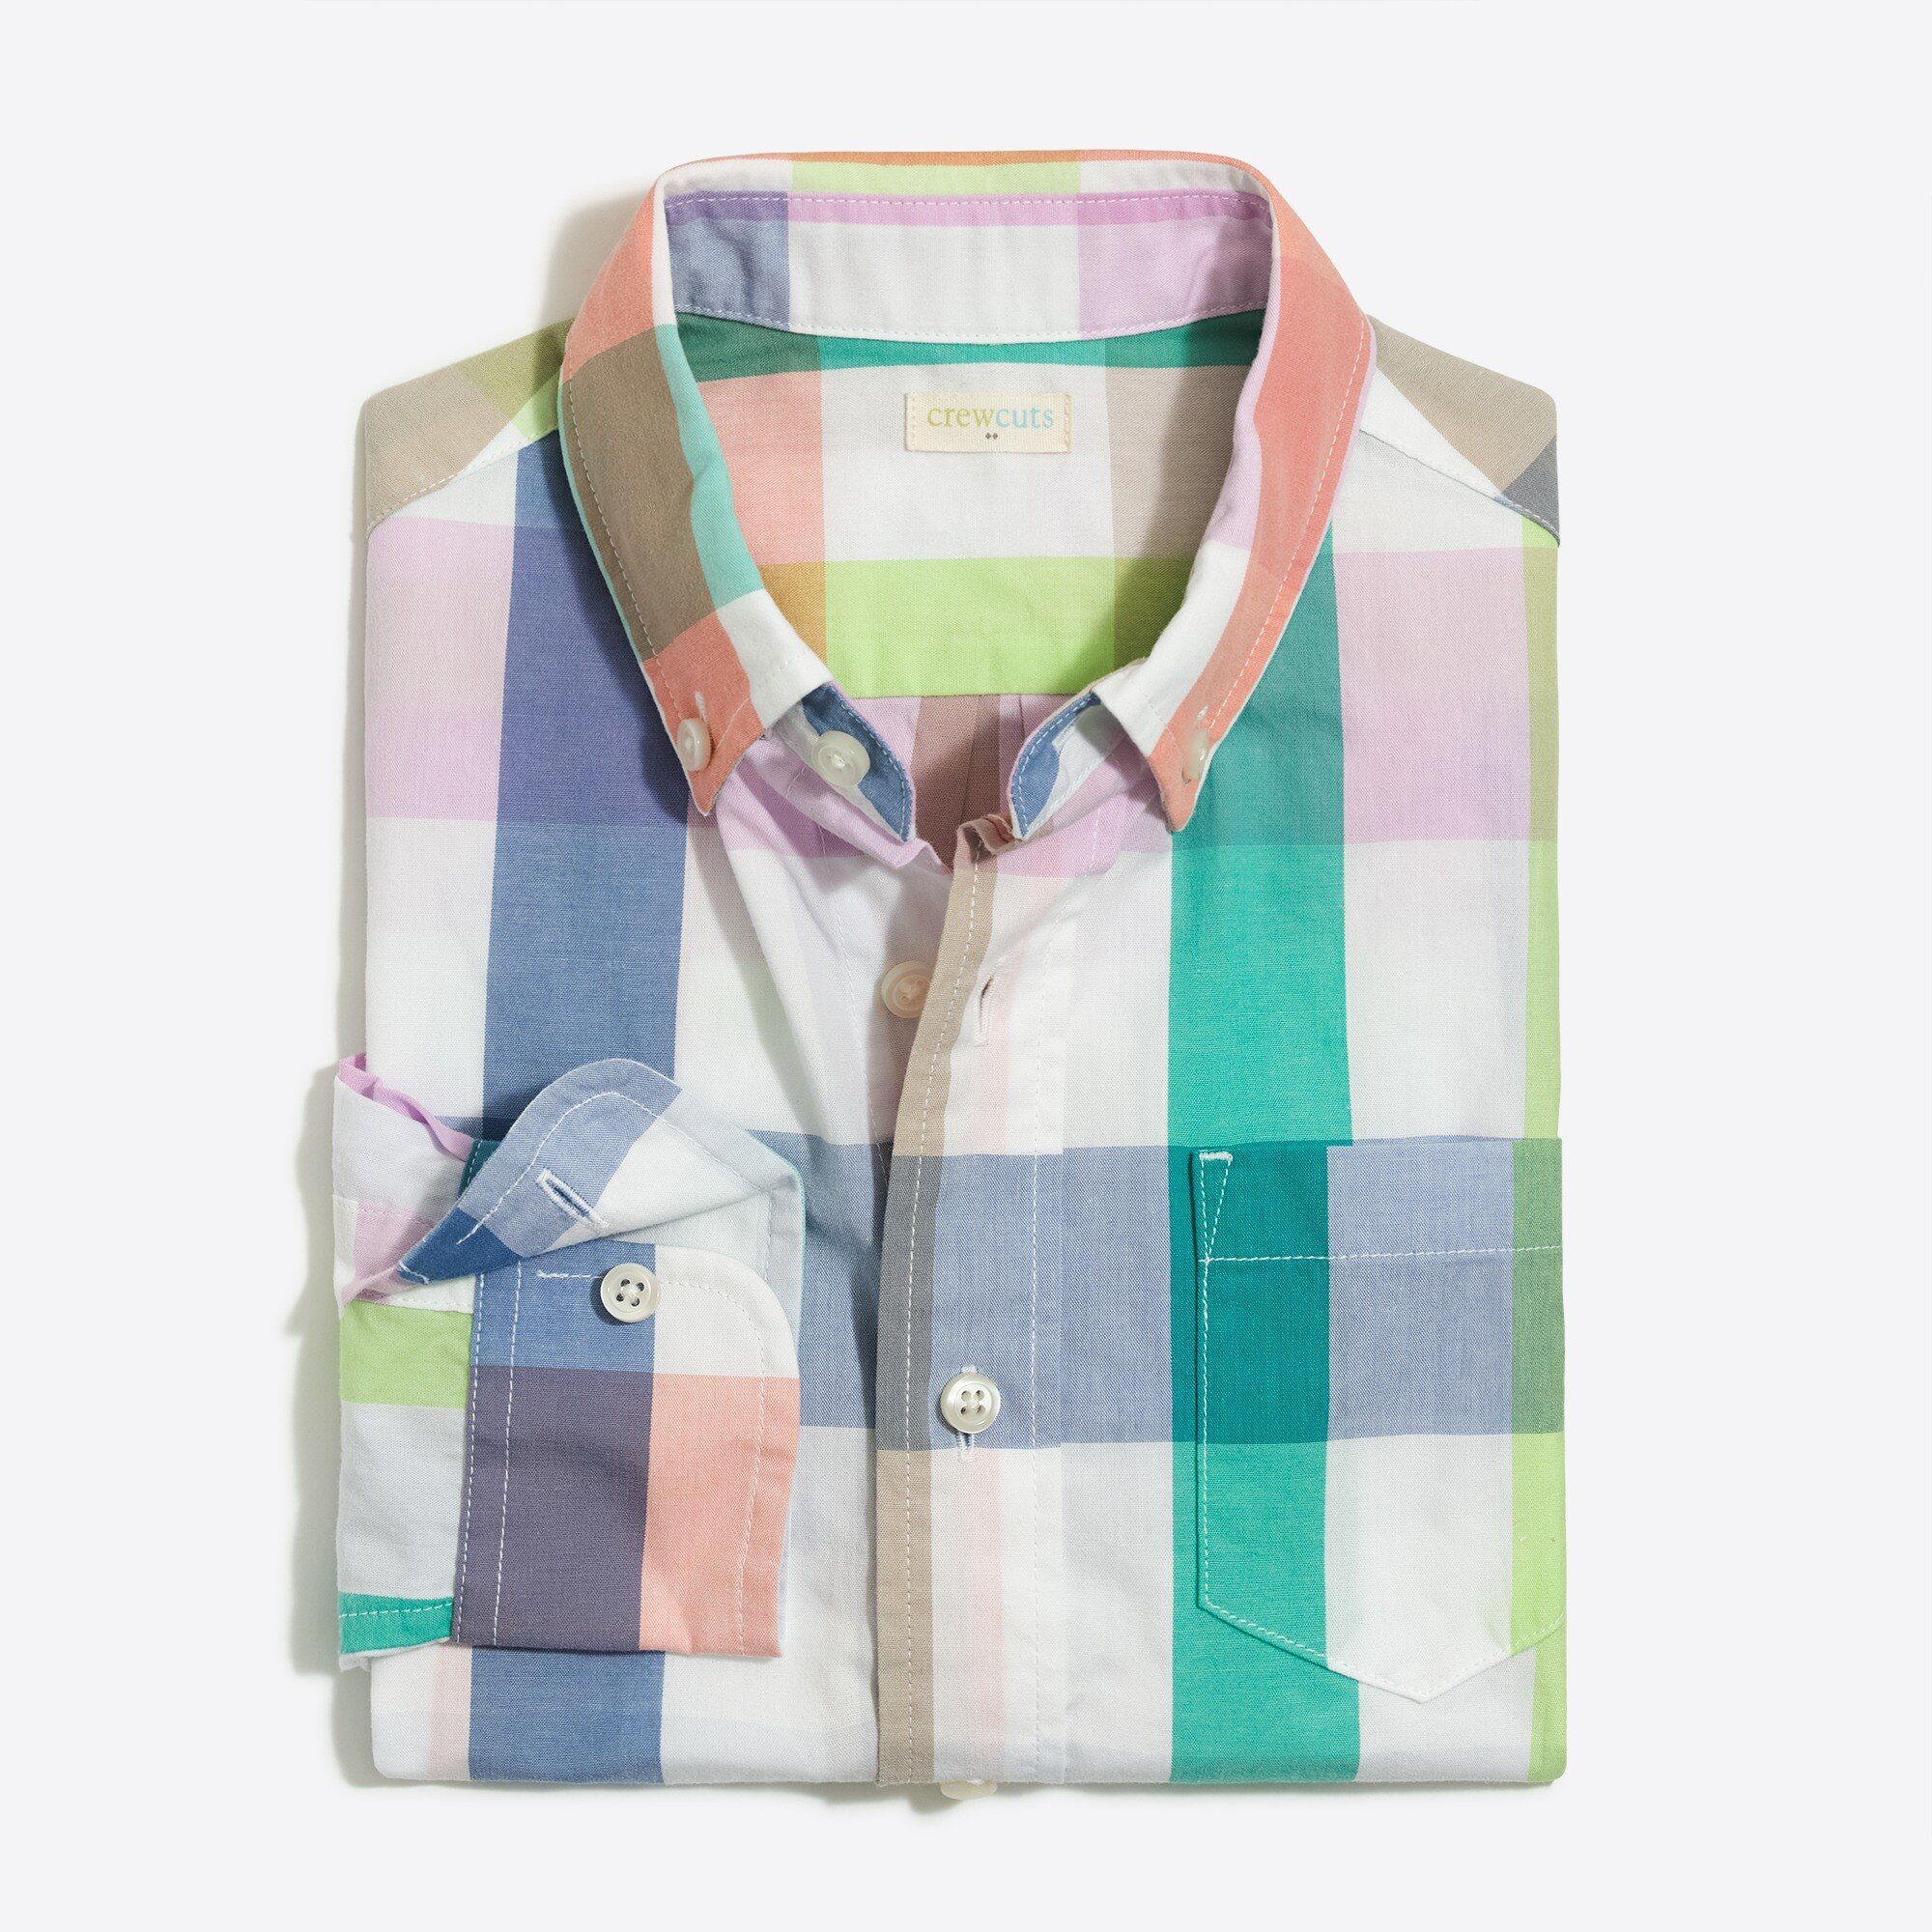 https://factory.jcrew.com/p/boys-clothing/shirts/washed_shirts/boys-patterned-washed-shirt/47255?col | J.Crew Factory